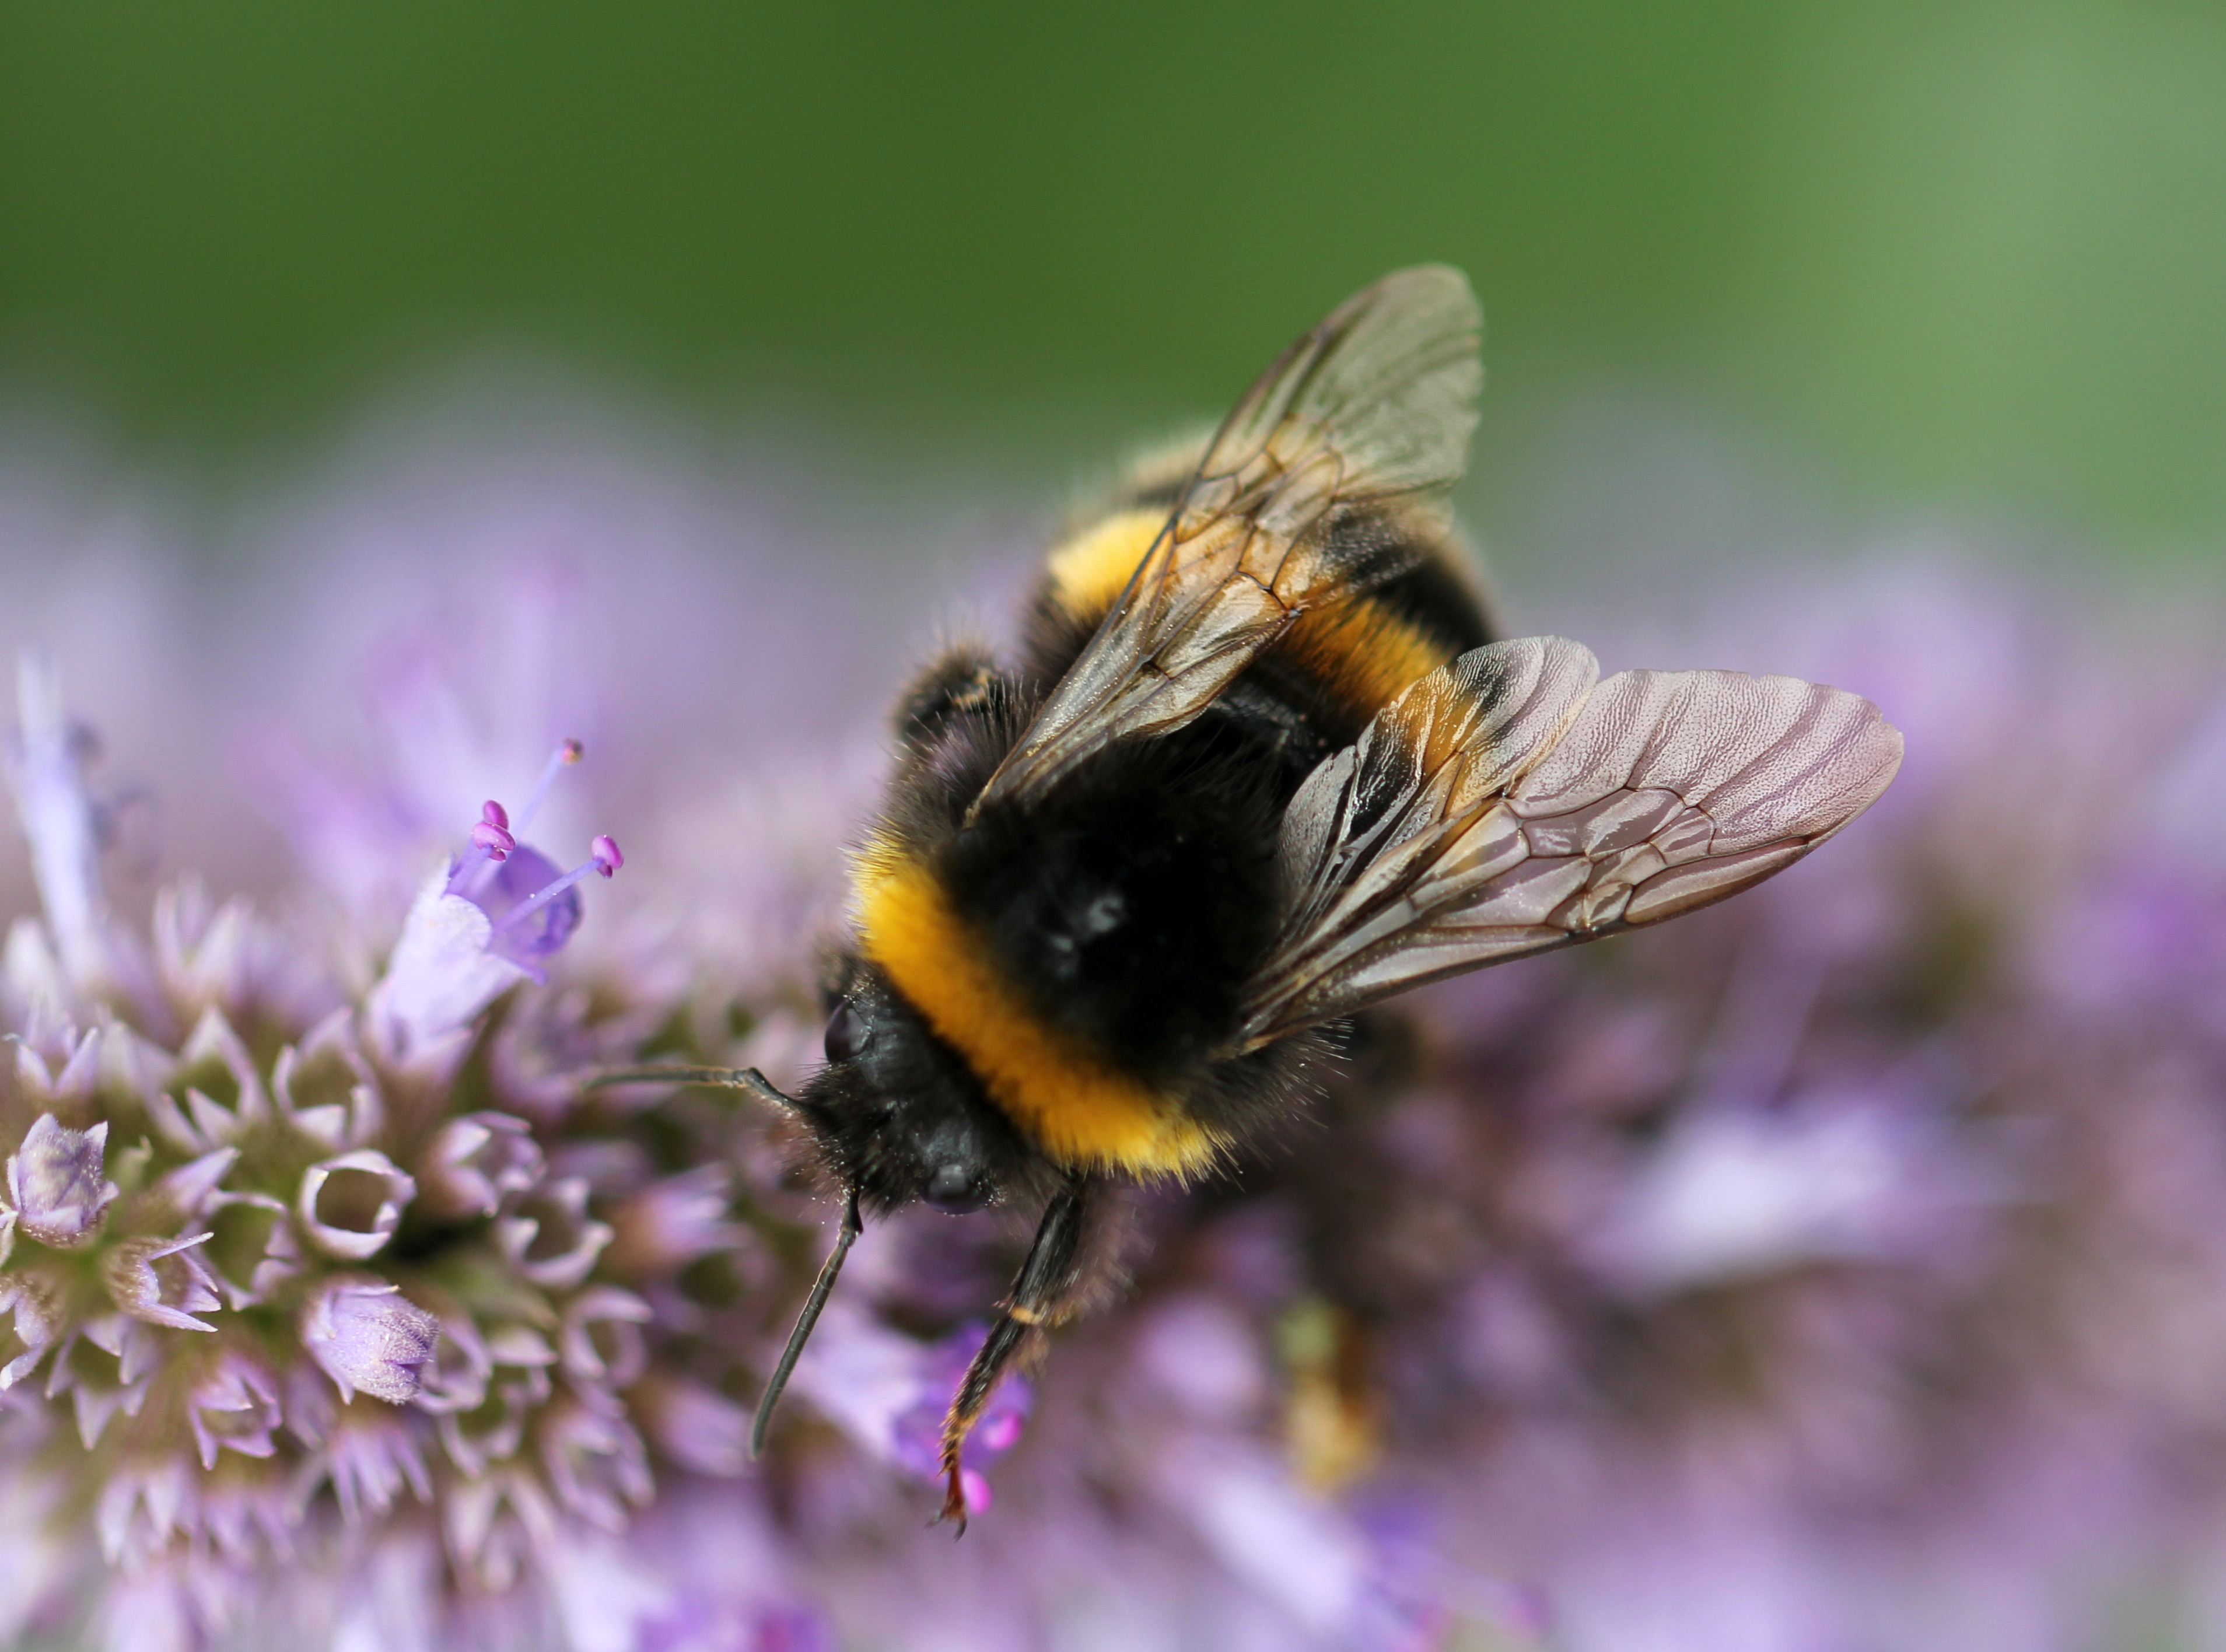 The Fascinating World of Bees: A Close-Up Photography Guide